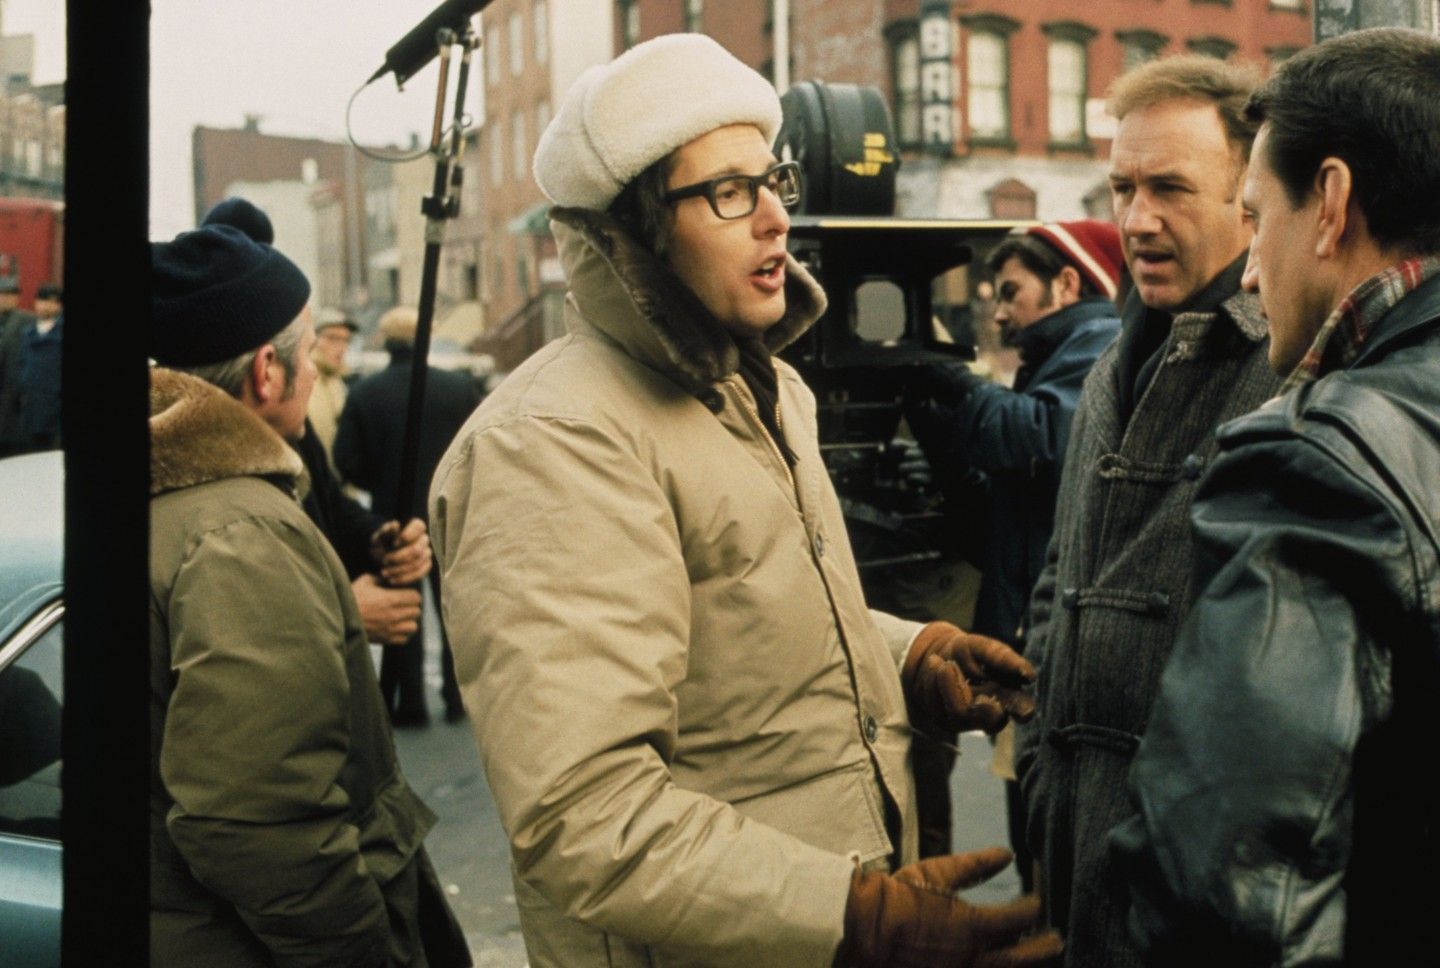 William Friedkin’s ‘The French Connection’: The Seventies’ Peak of Cinematic Excitement